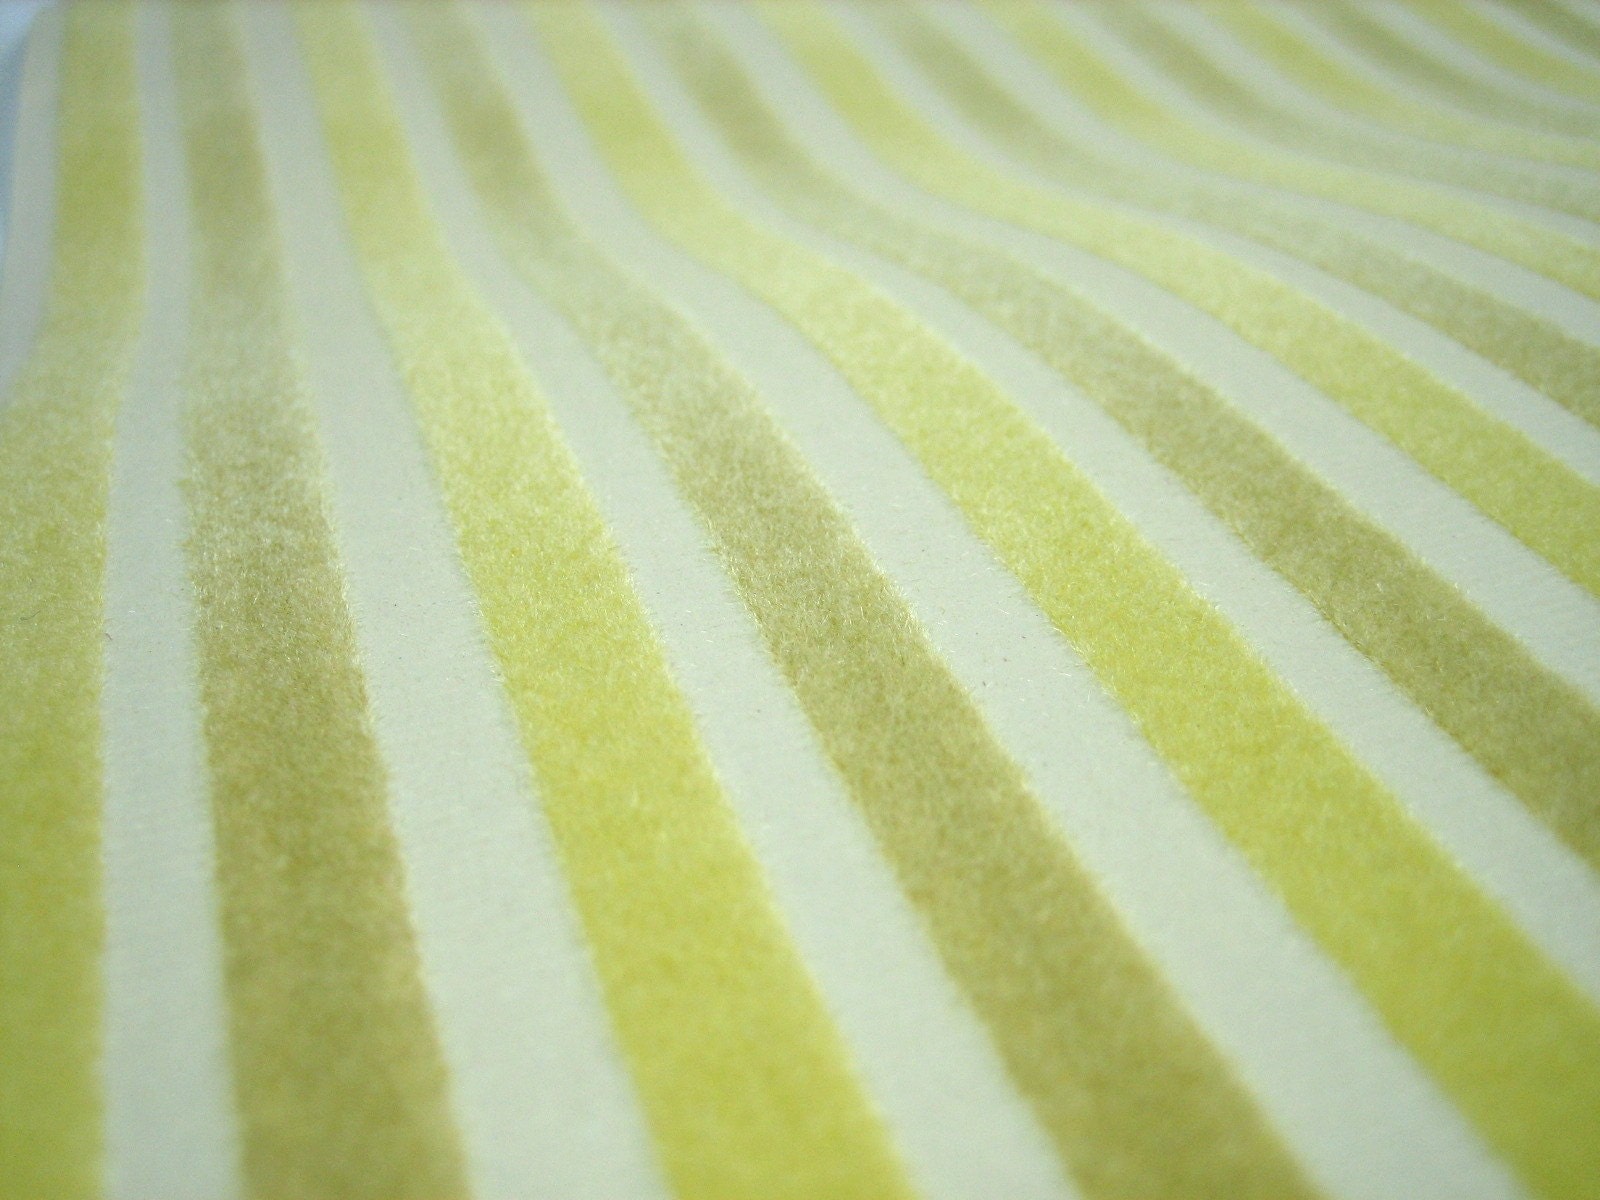 Vintage Striped Flocked Wallpaper by the Yard. From AttysVintage